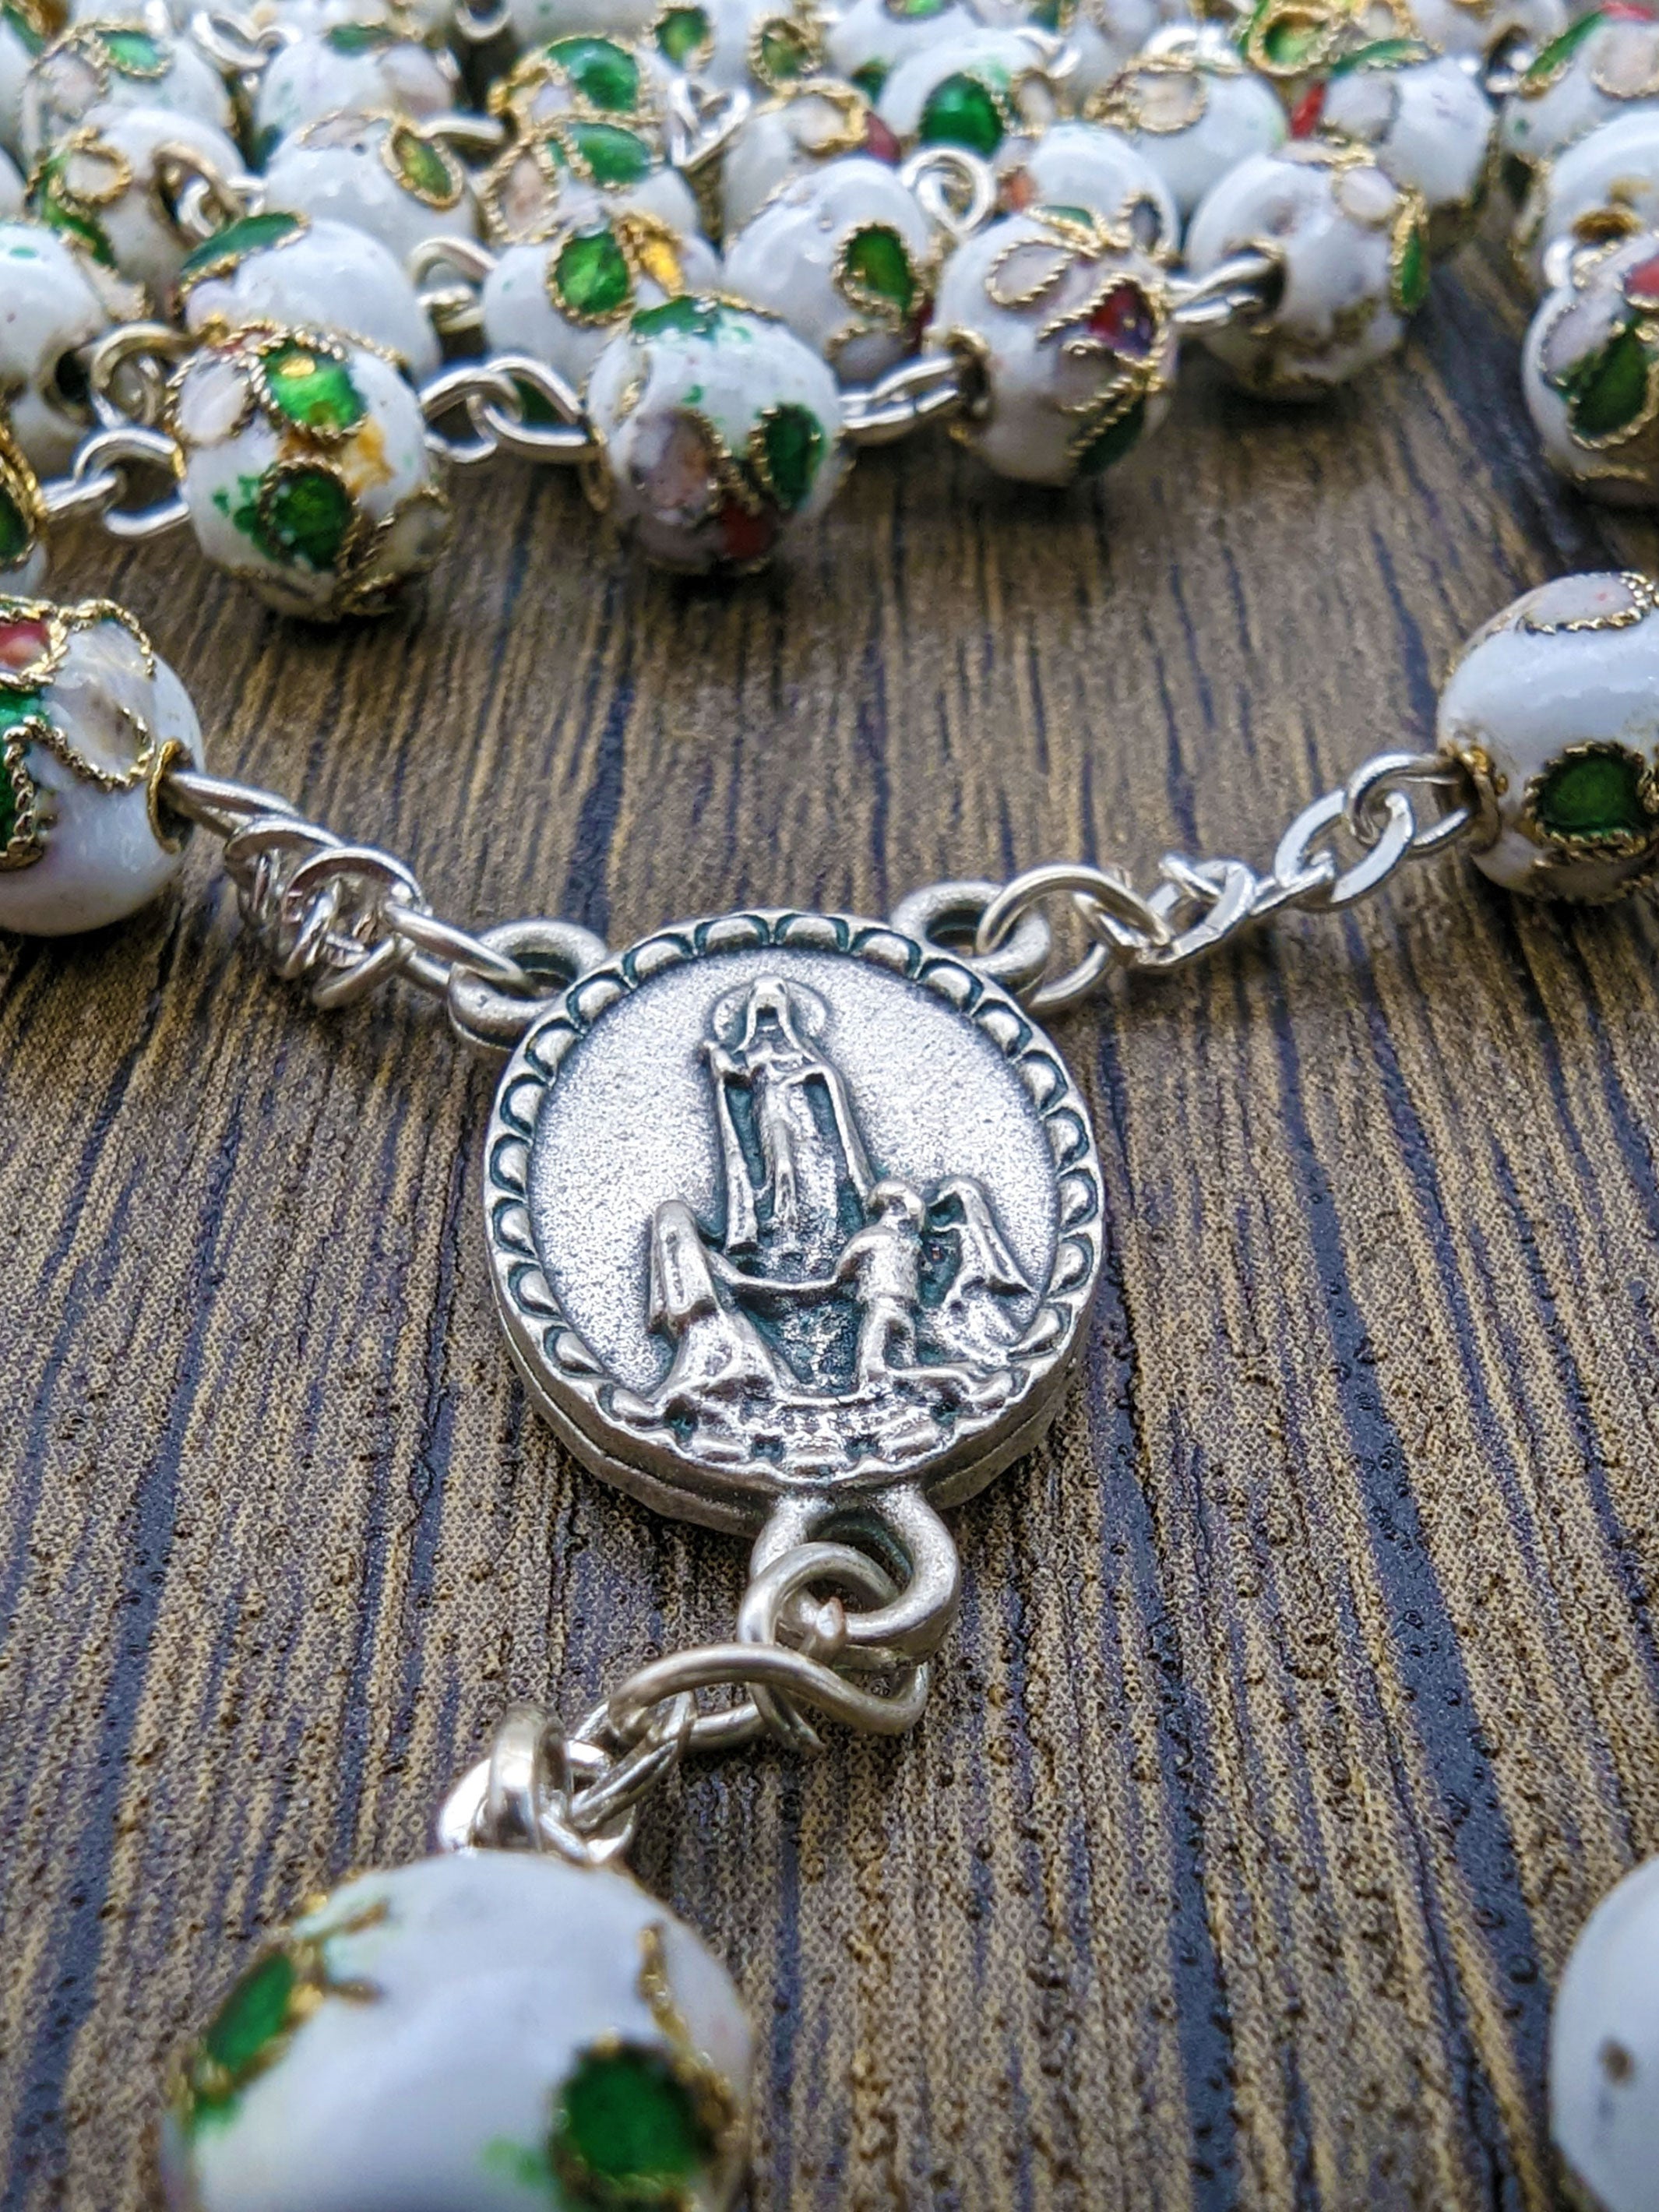 Handmade 8mm White Cloisonne Glass Beads Our Lady of Fatima Rosary